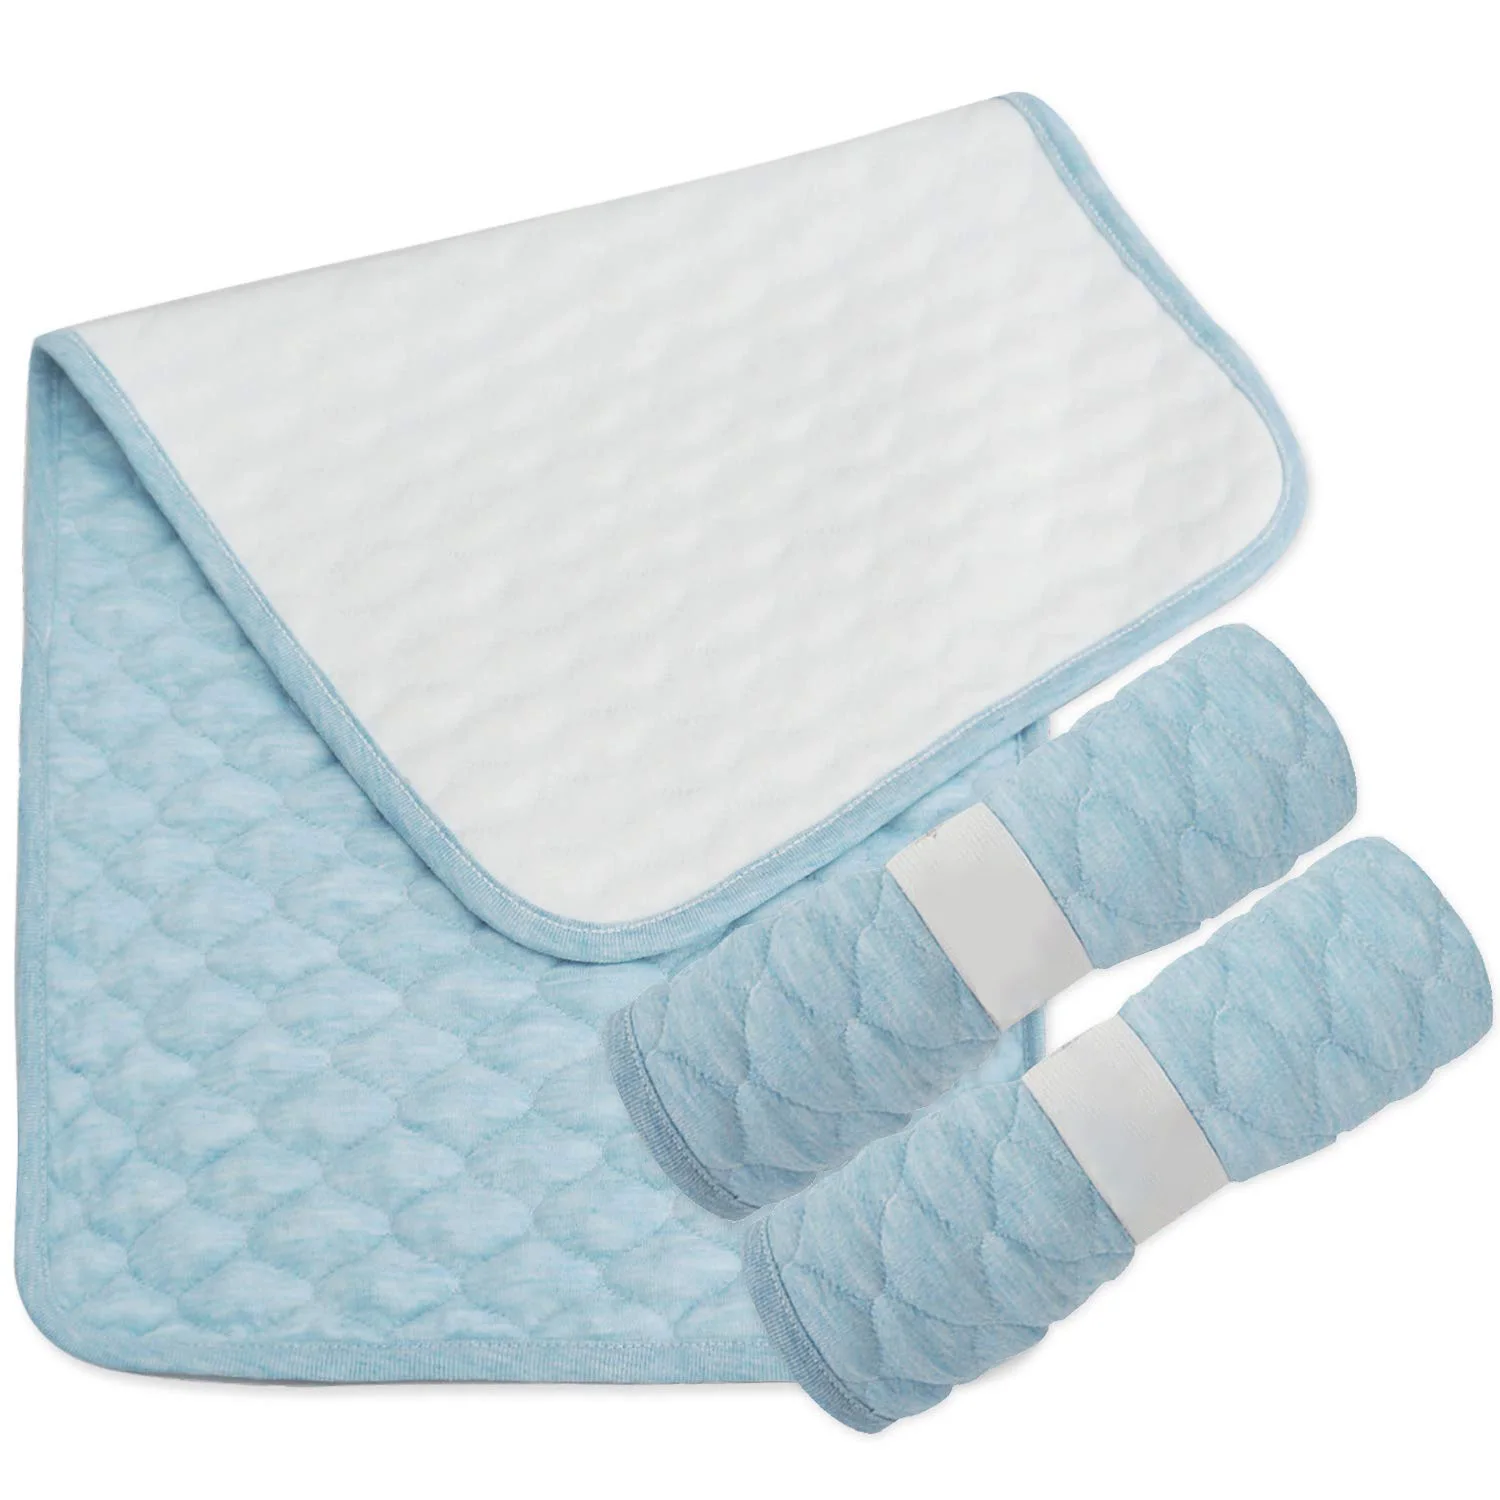 diaper pads for adults